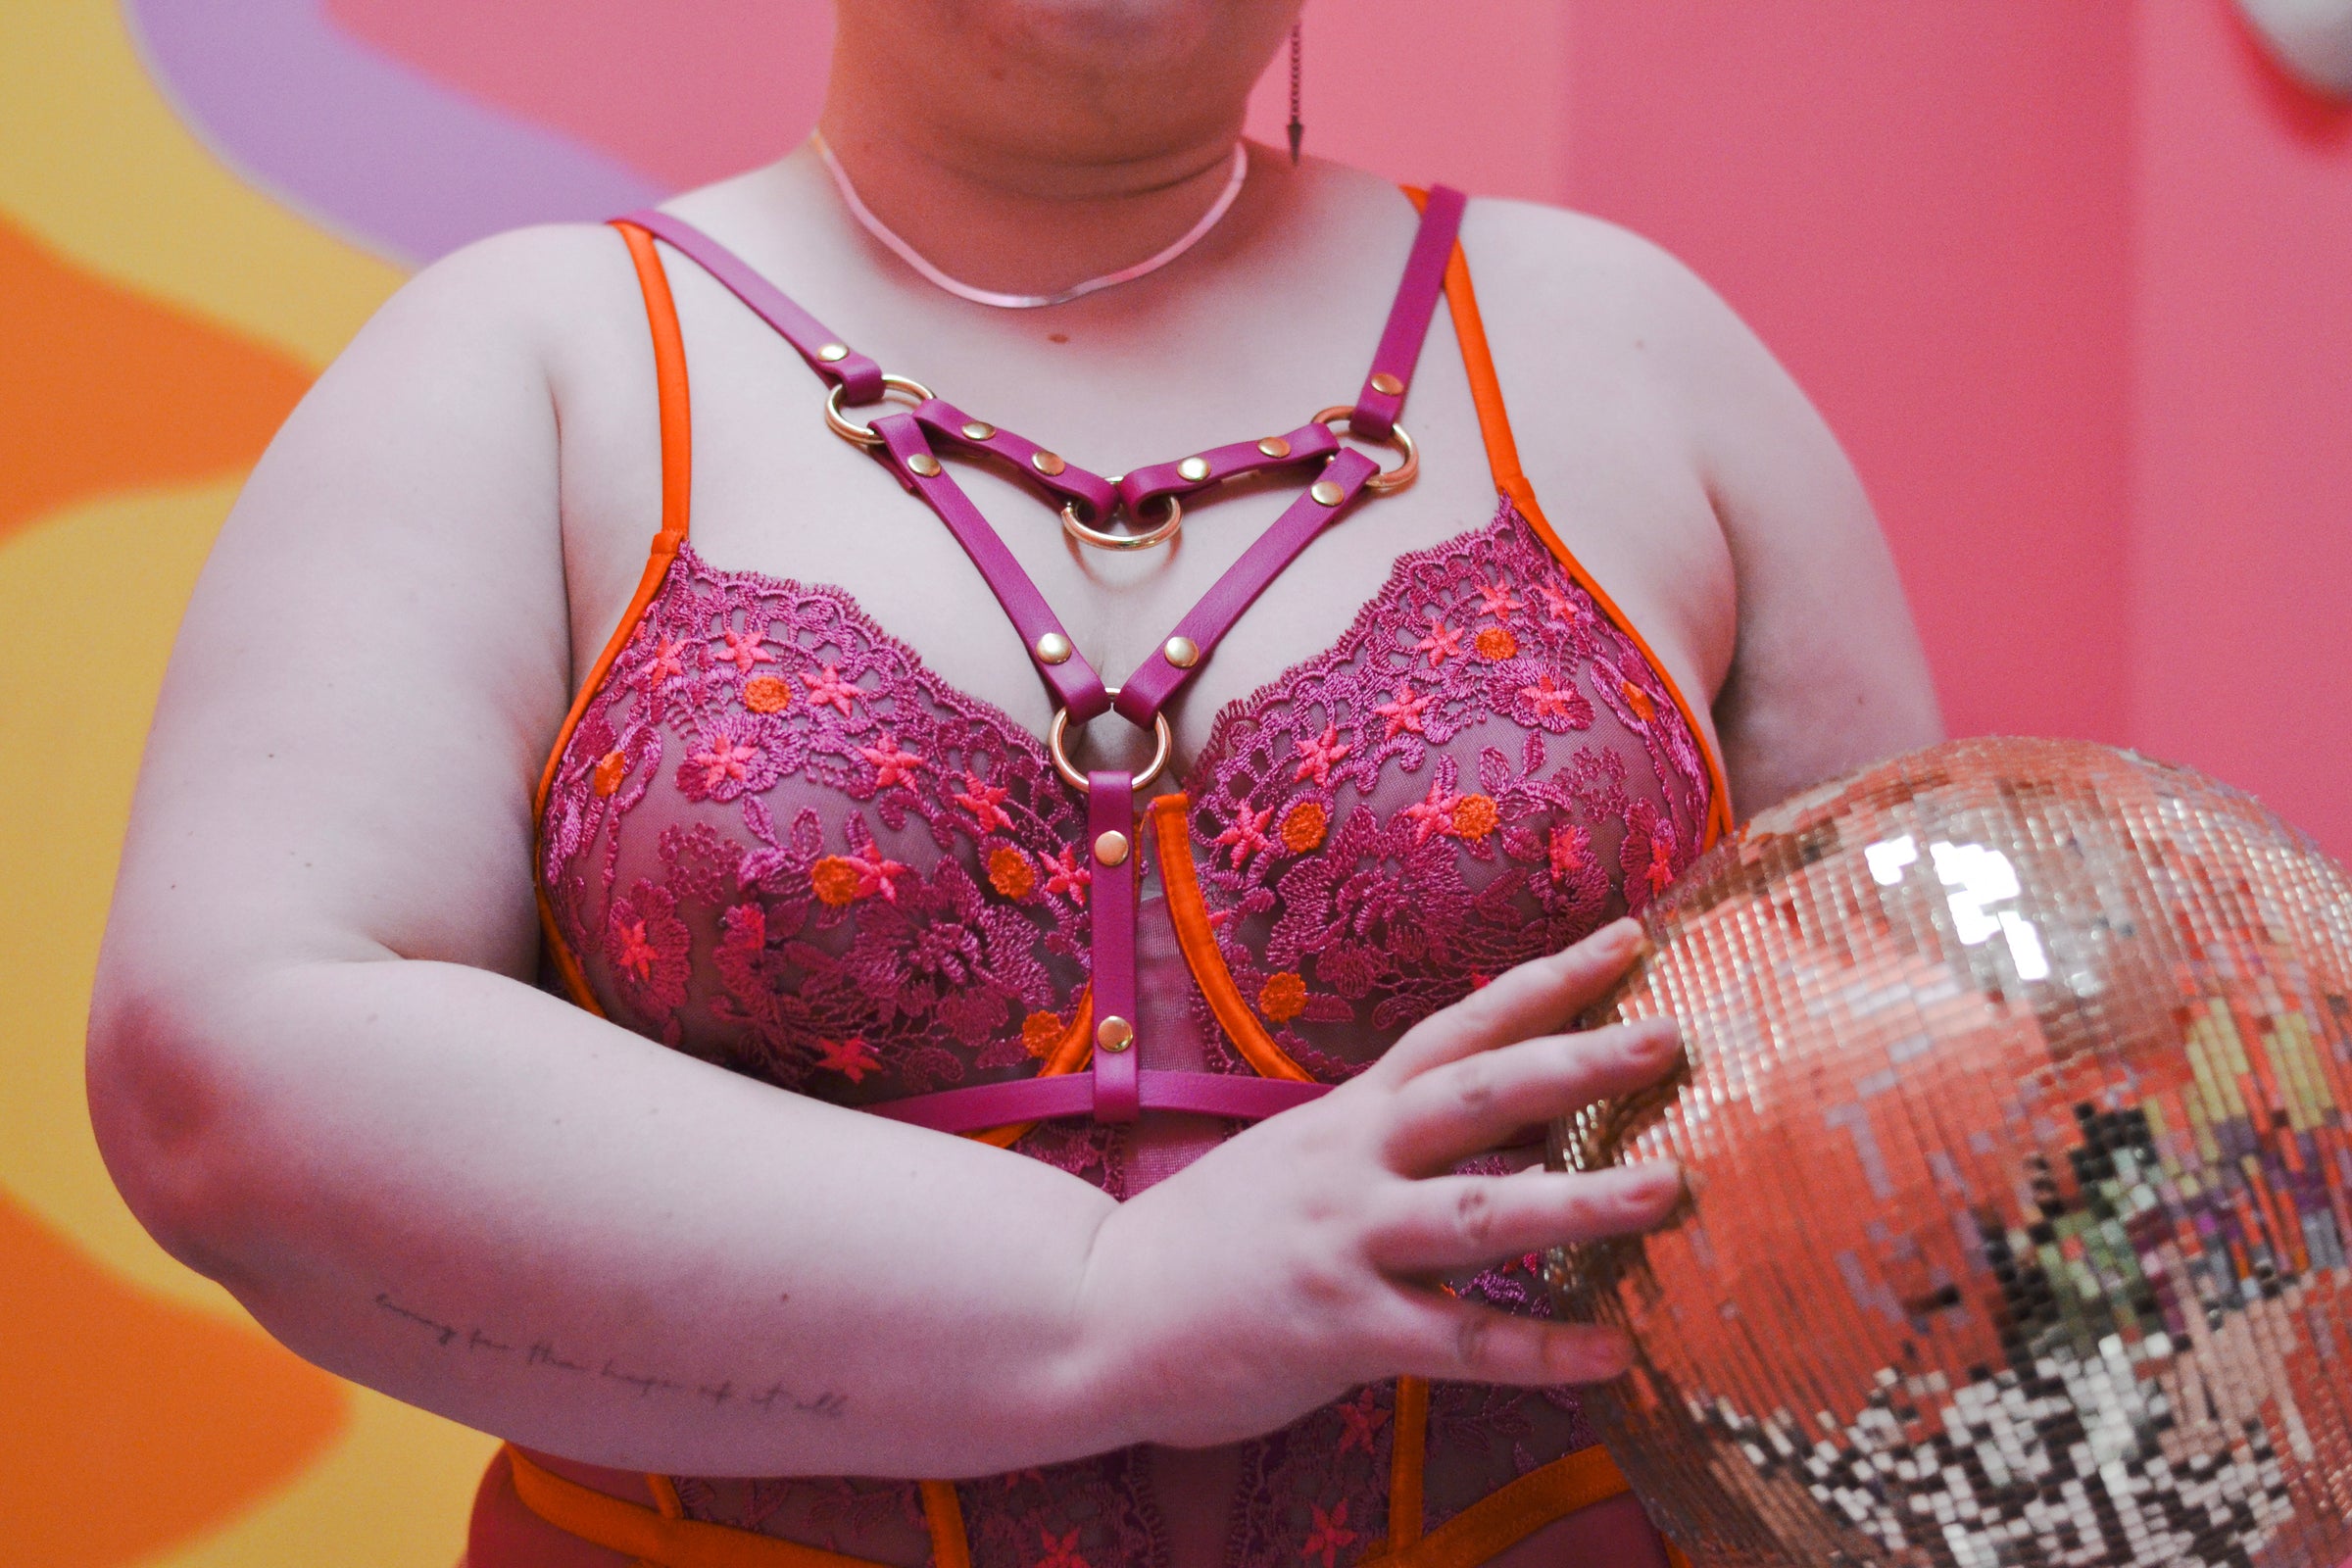 Closeup shot of person holding a disco ball and wearing the magenta angle grinder harness over their pink bodysuit.